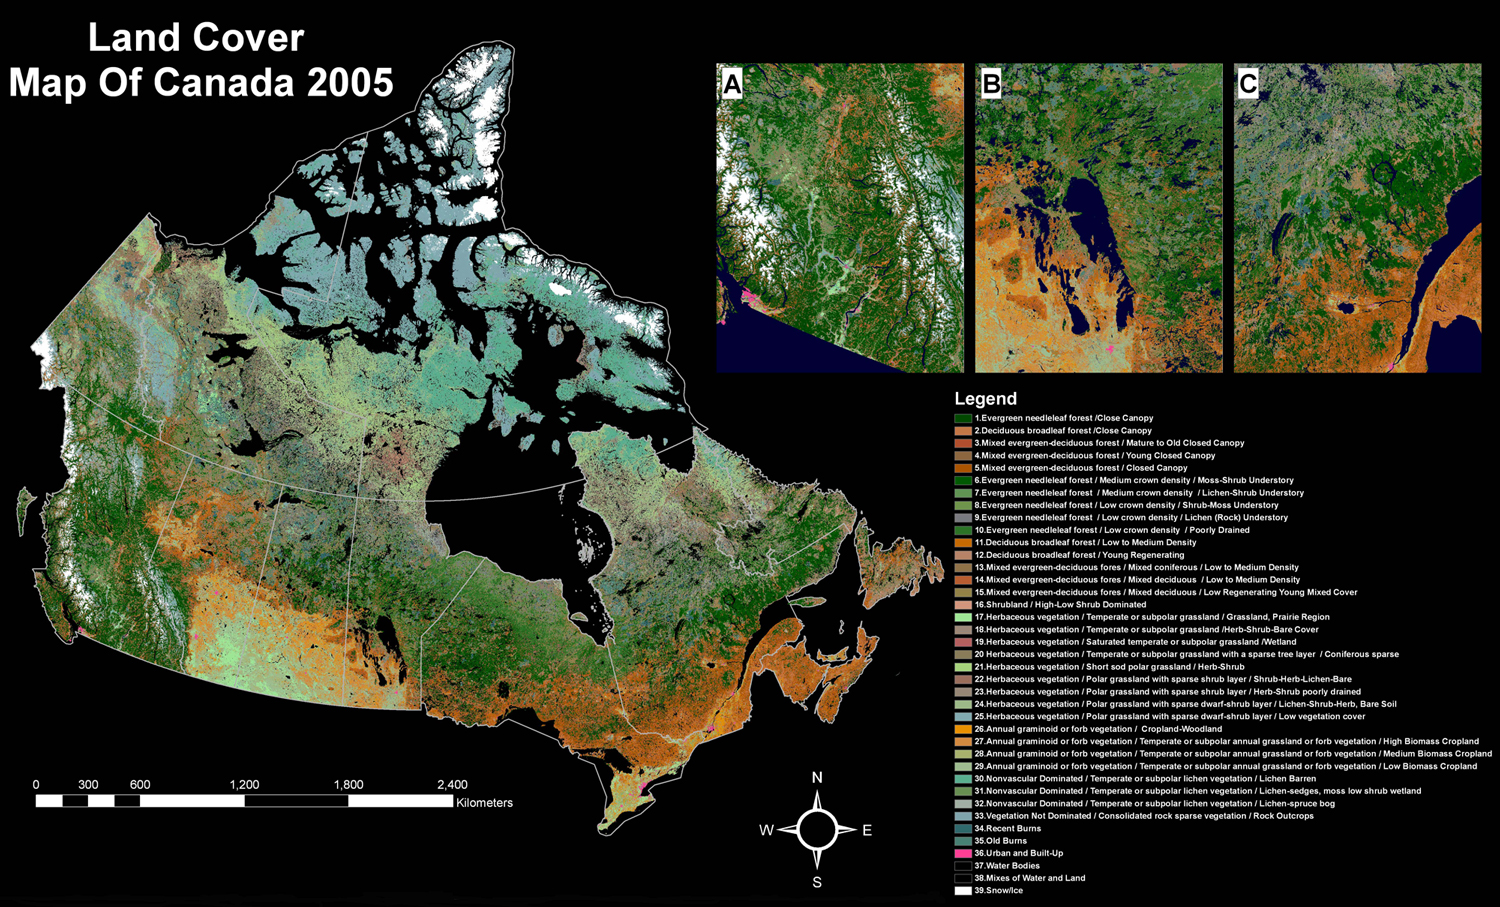 This map shows the status of land cover across Canada in 2005. As noted in the text, an important set of satellite images were geometrically and radiometrically corrected, refined and integrated to generate this product. This map includes a legend covering 39 items, most of which refer to various types of plant coverage.